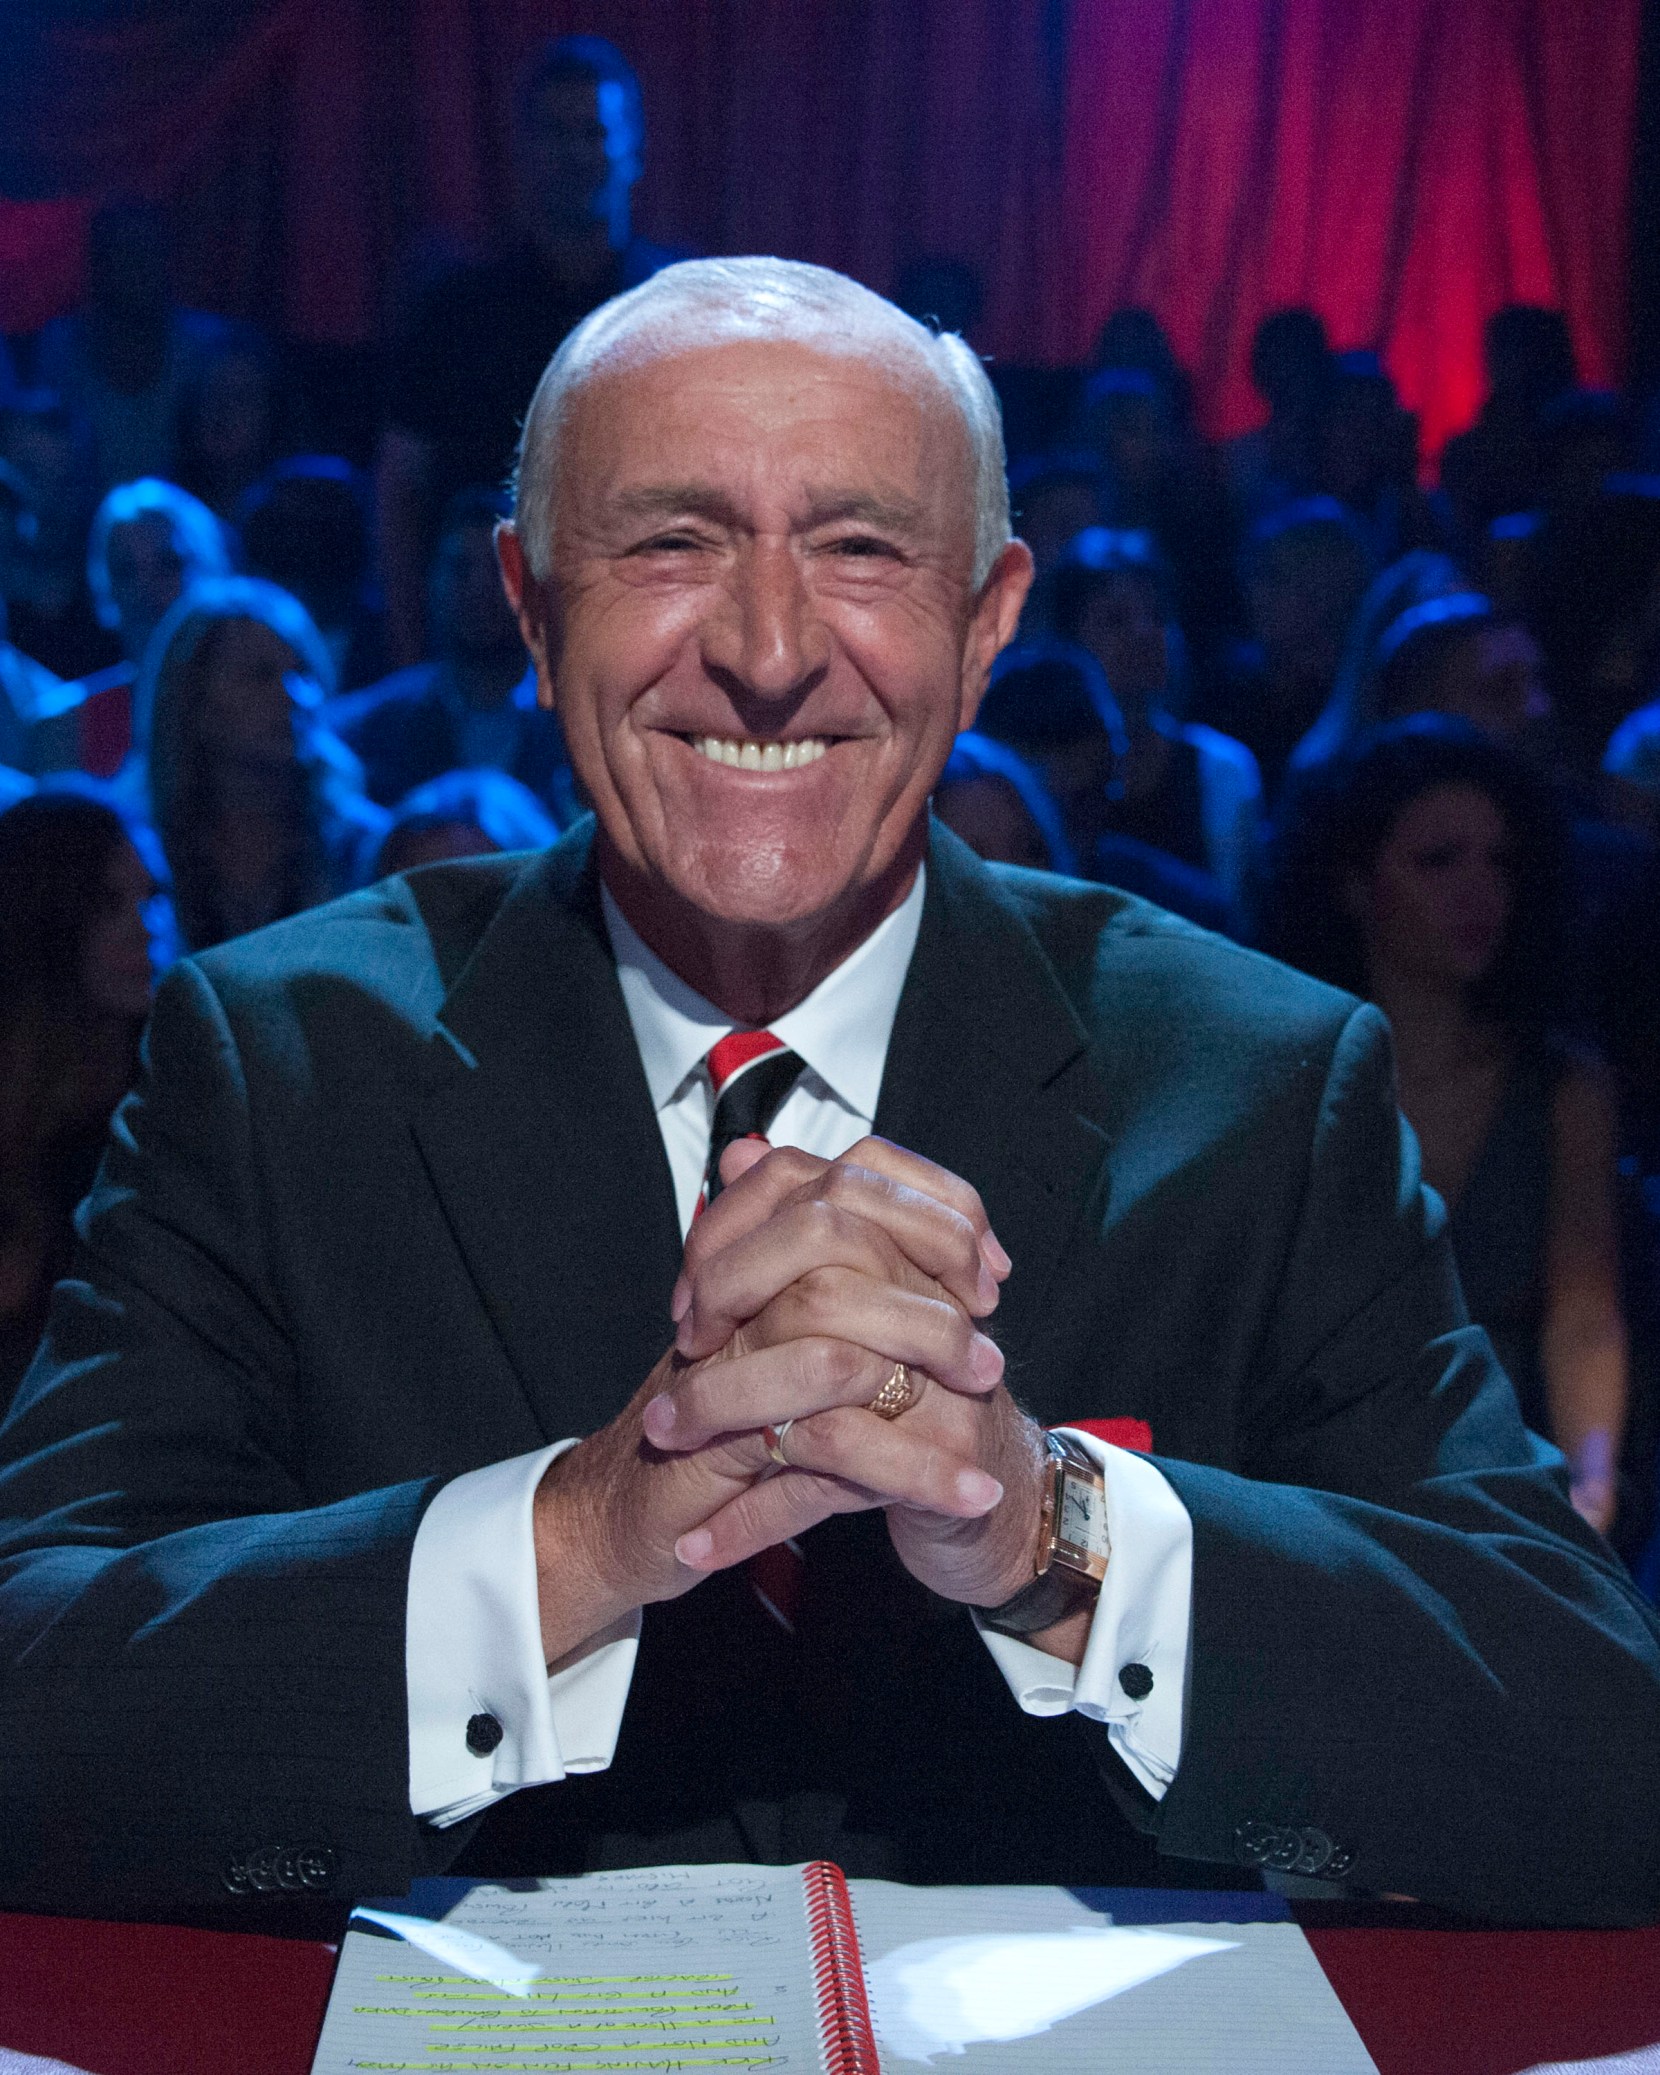 Len Goodman to Miss a Few Weeks of 'Dancing With the Stars' — Find Out